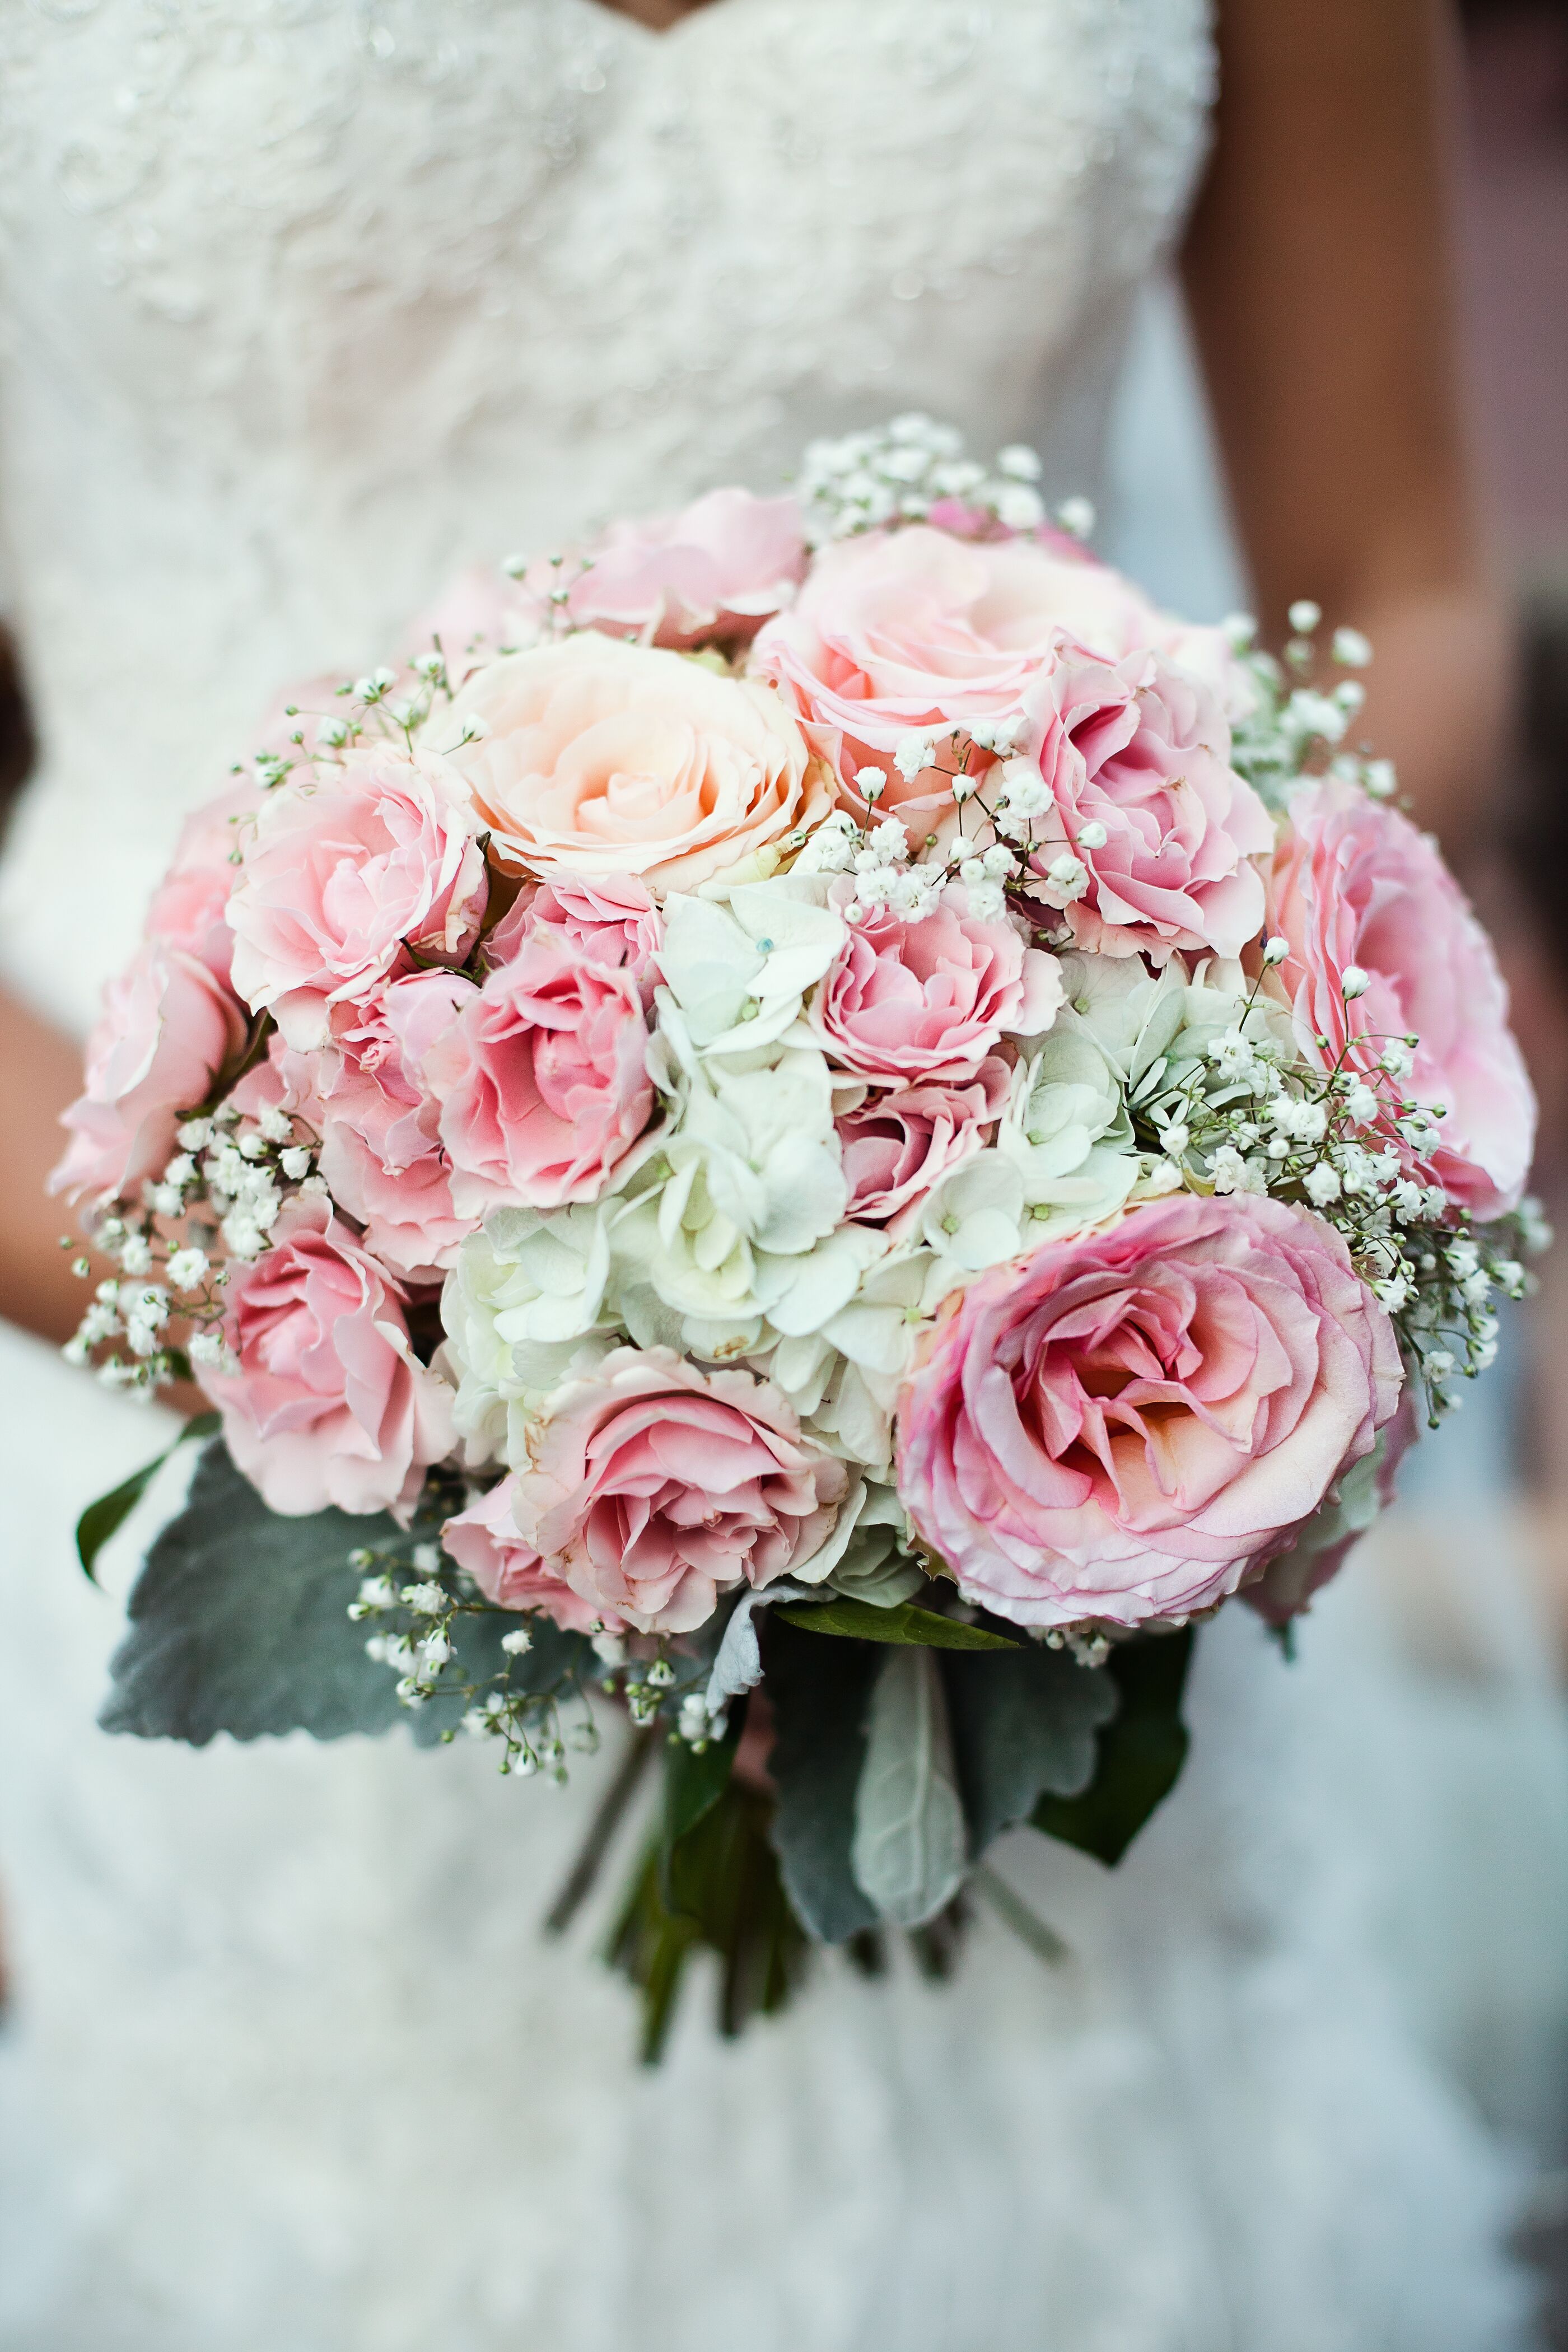 Image of Wedding bouquet made of white roses and pink hydrangeas